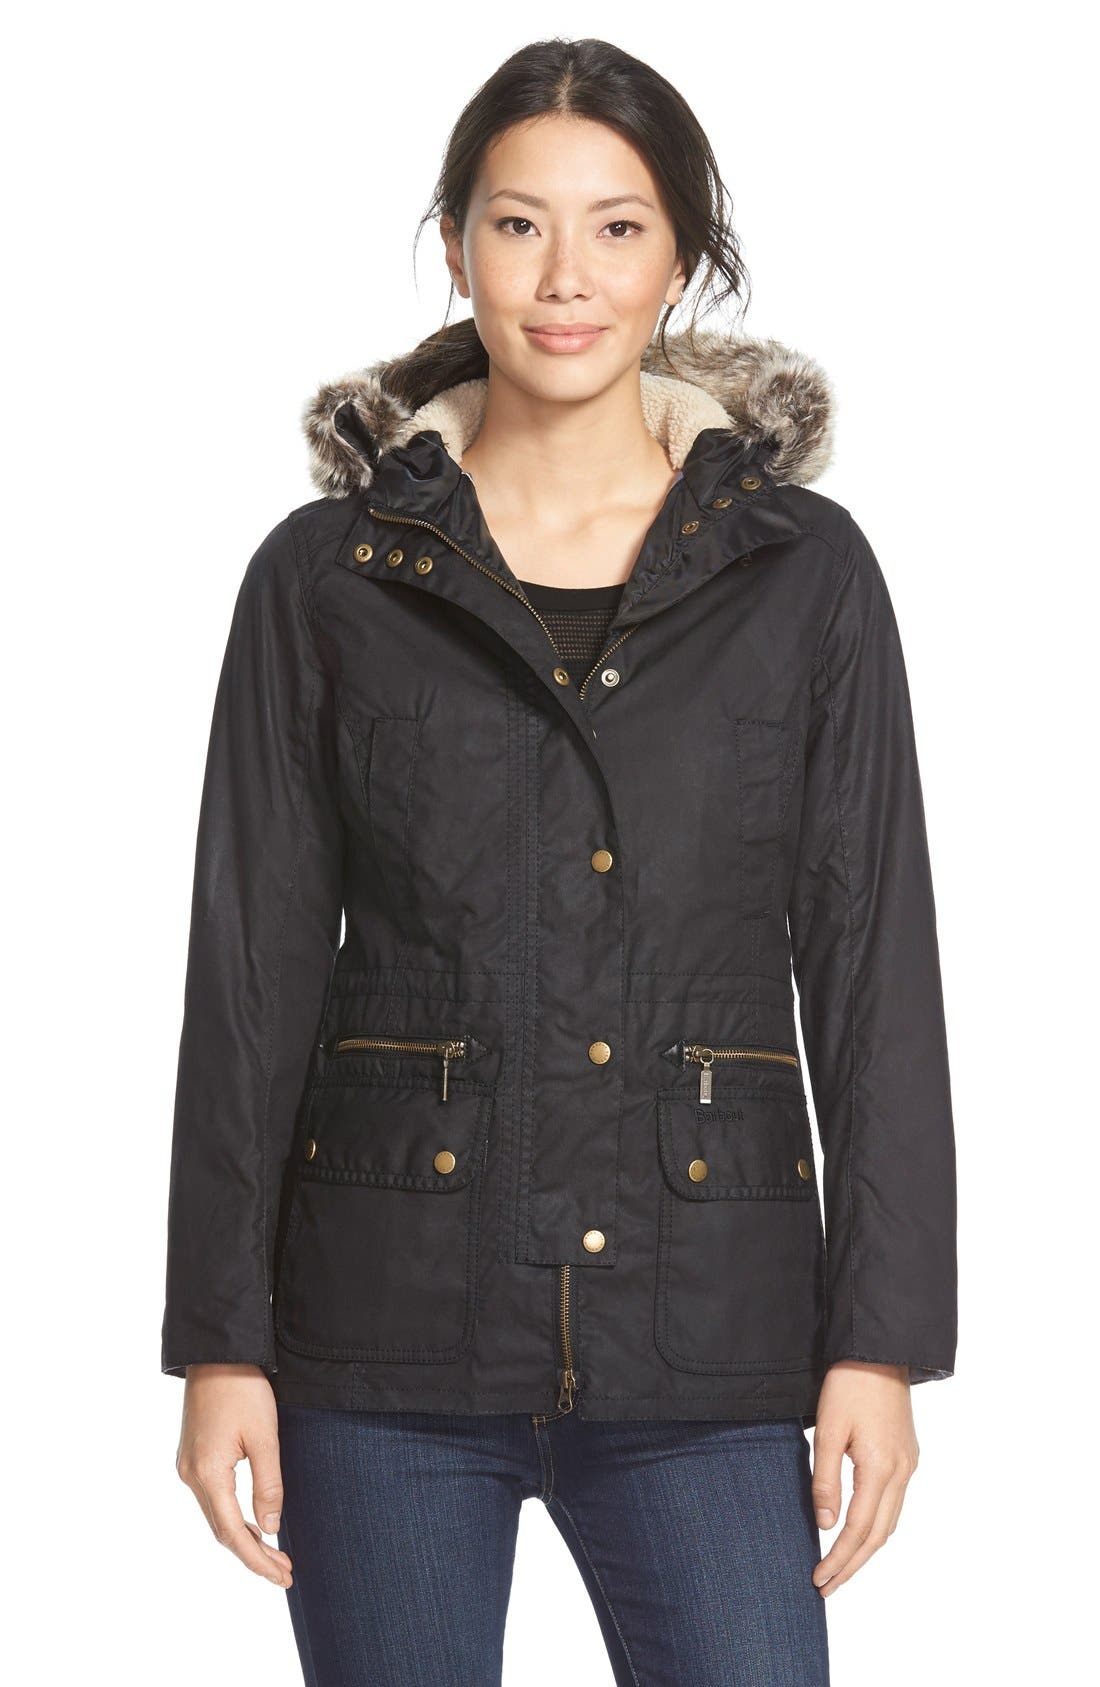 barbour kelsall waxed jacket